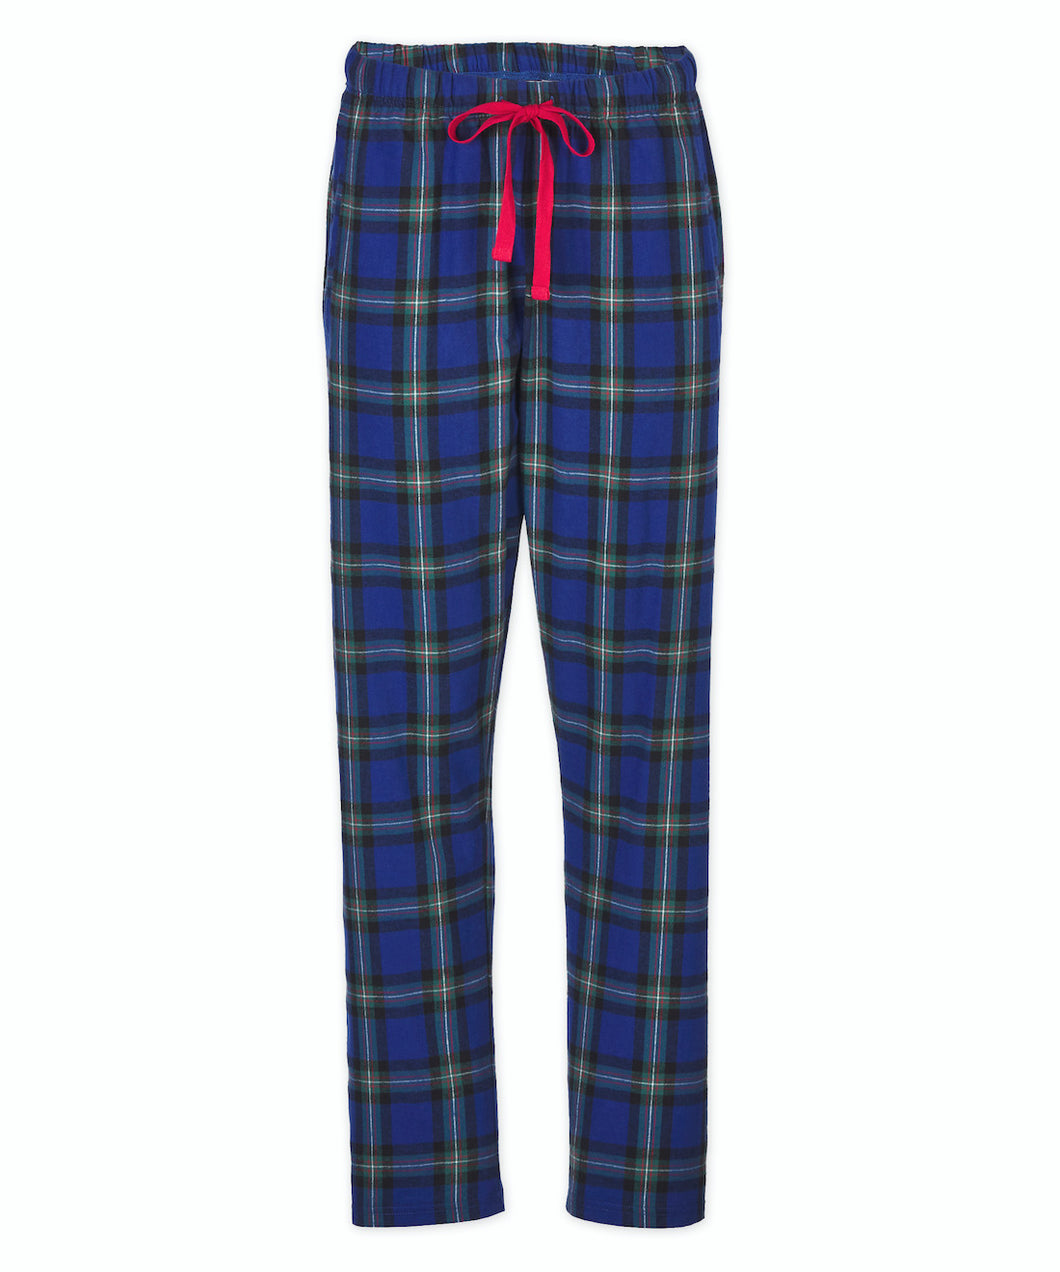 100% Cozy and Warm Flannel Pajama Pants for Women in a Variety of Colors